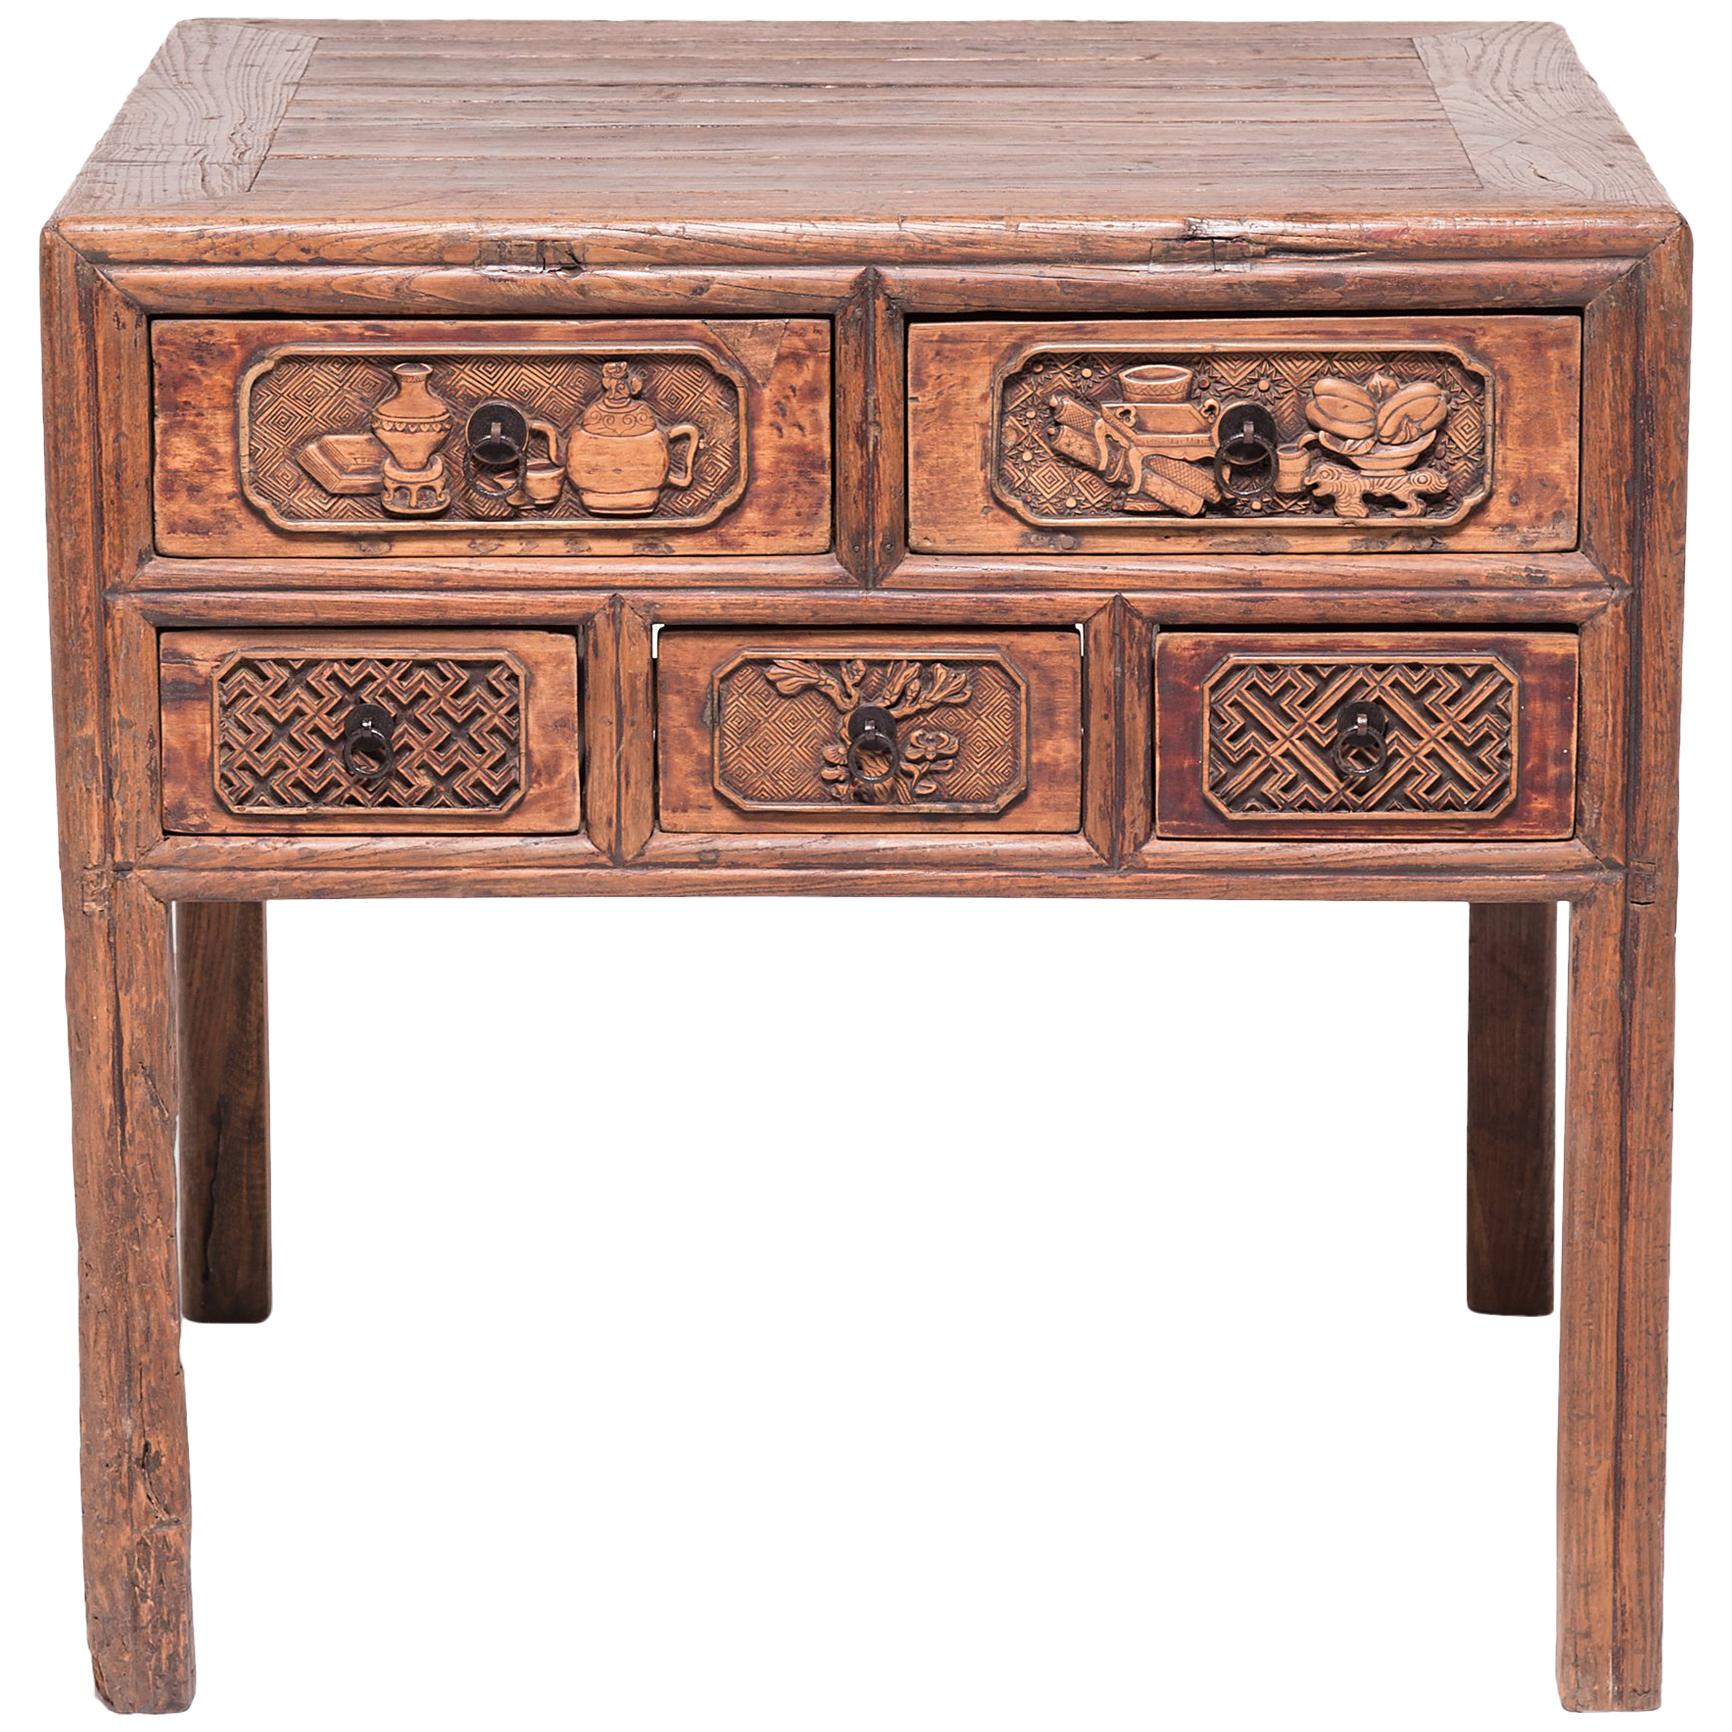 Chinese Ten-Drawer Offering Table, c. 1850